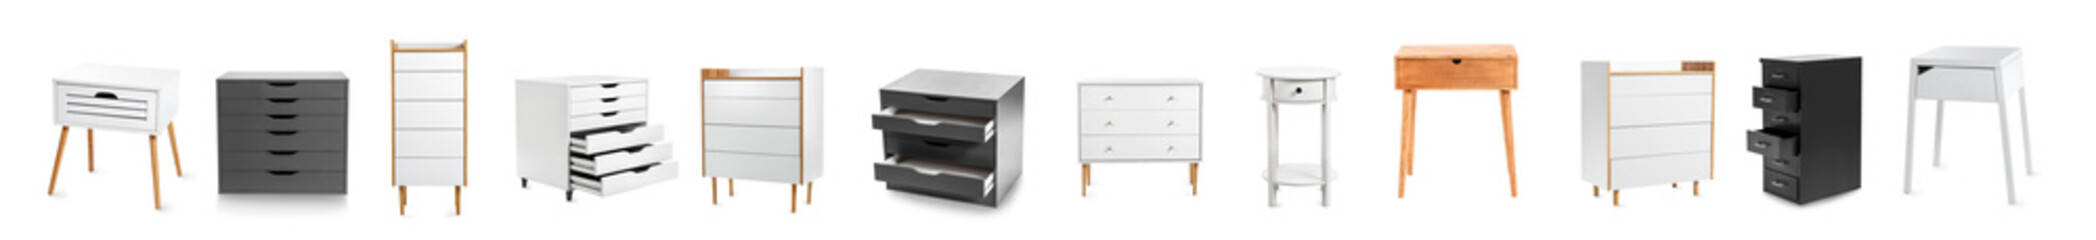 Set of different chest of drawers on white background